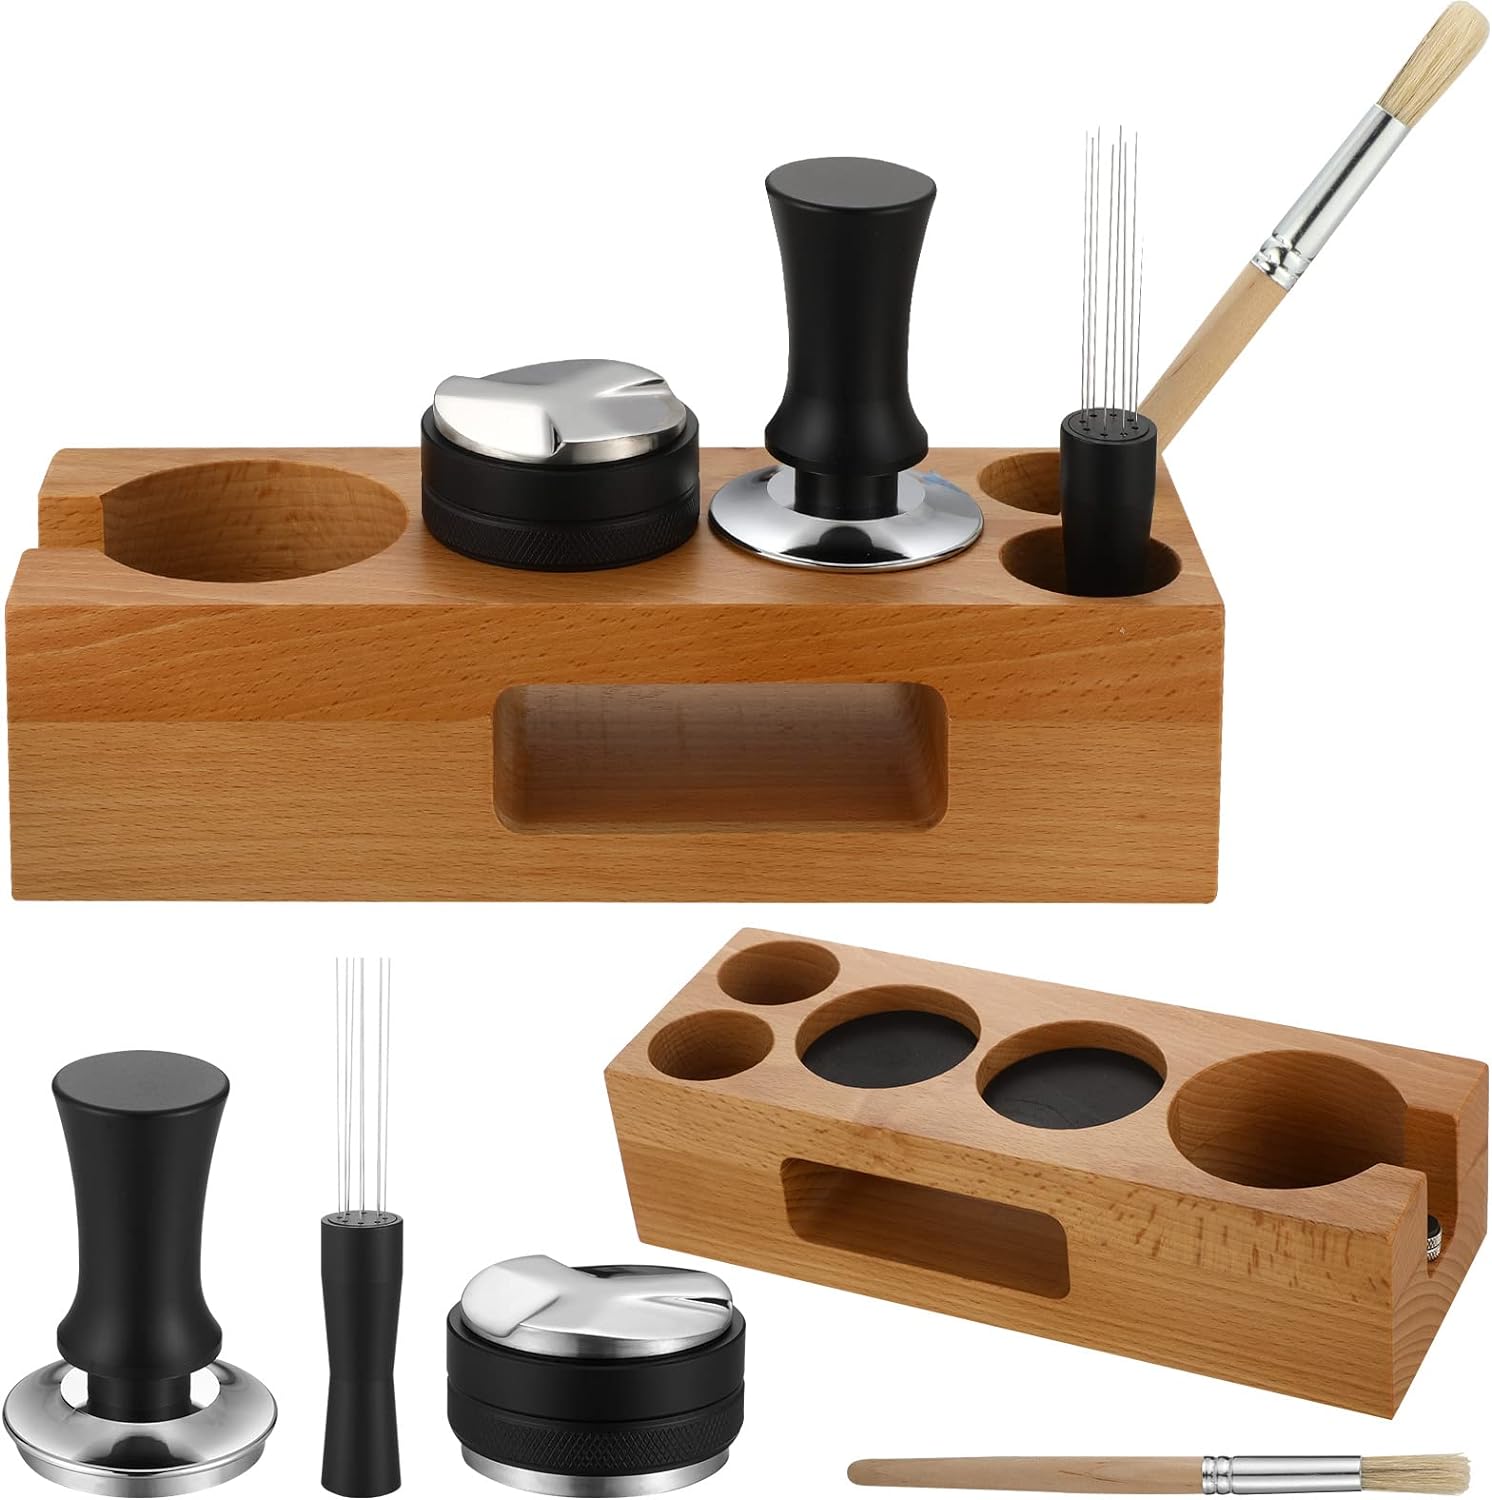 Roowest 5 Pack Espresso Accessories Kit Wooden Tamper Station Coffee Distributor Tamper Espresso Stirrer Coffee Tamping Mat with Coffee Brush, Multipurpose Espresso Tools for Bar Home Office, 58 mm